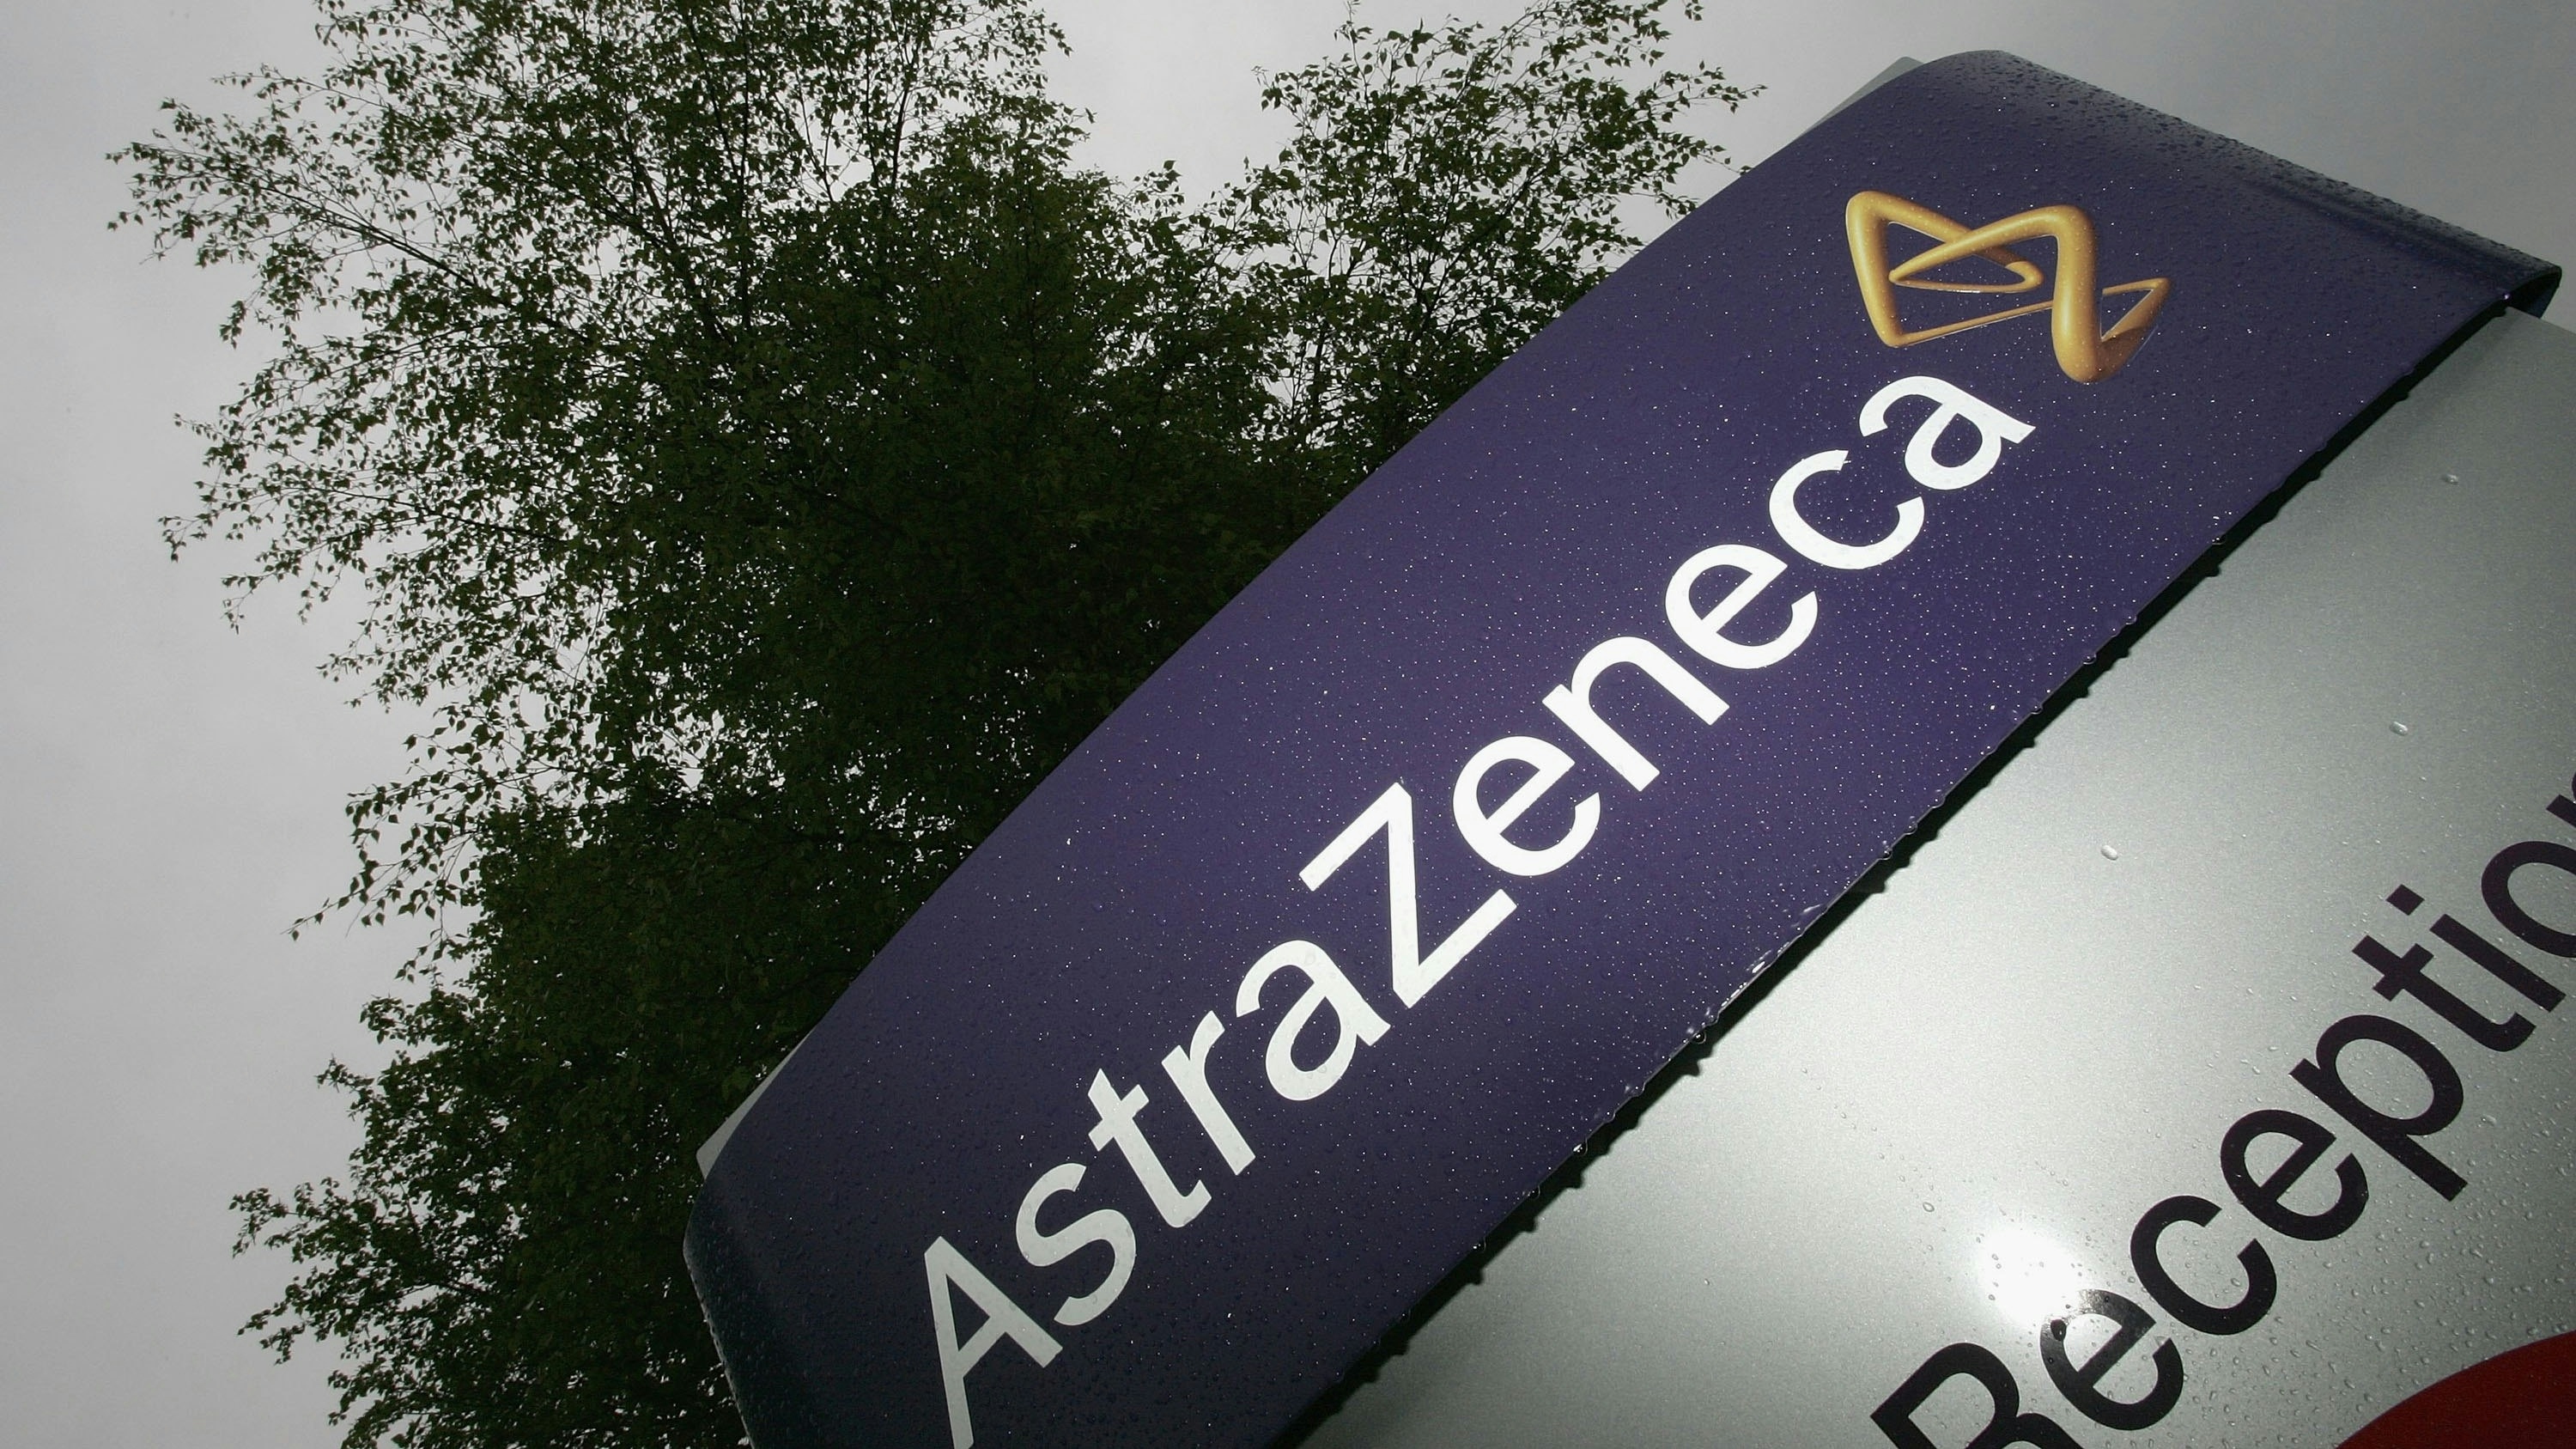 Corporate logos are seen outside the Macclesfield factory of AstraZeneca on May 15, 2006, in Macclesfield, England.